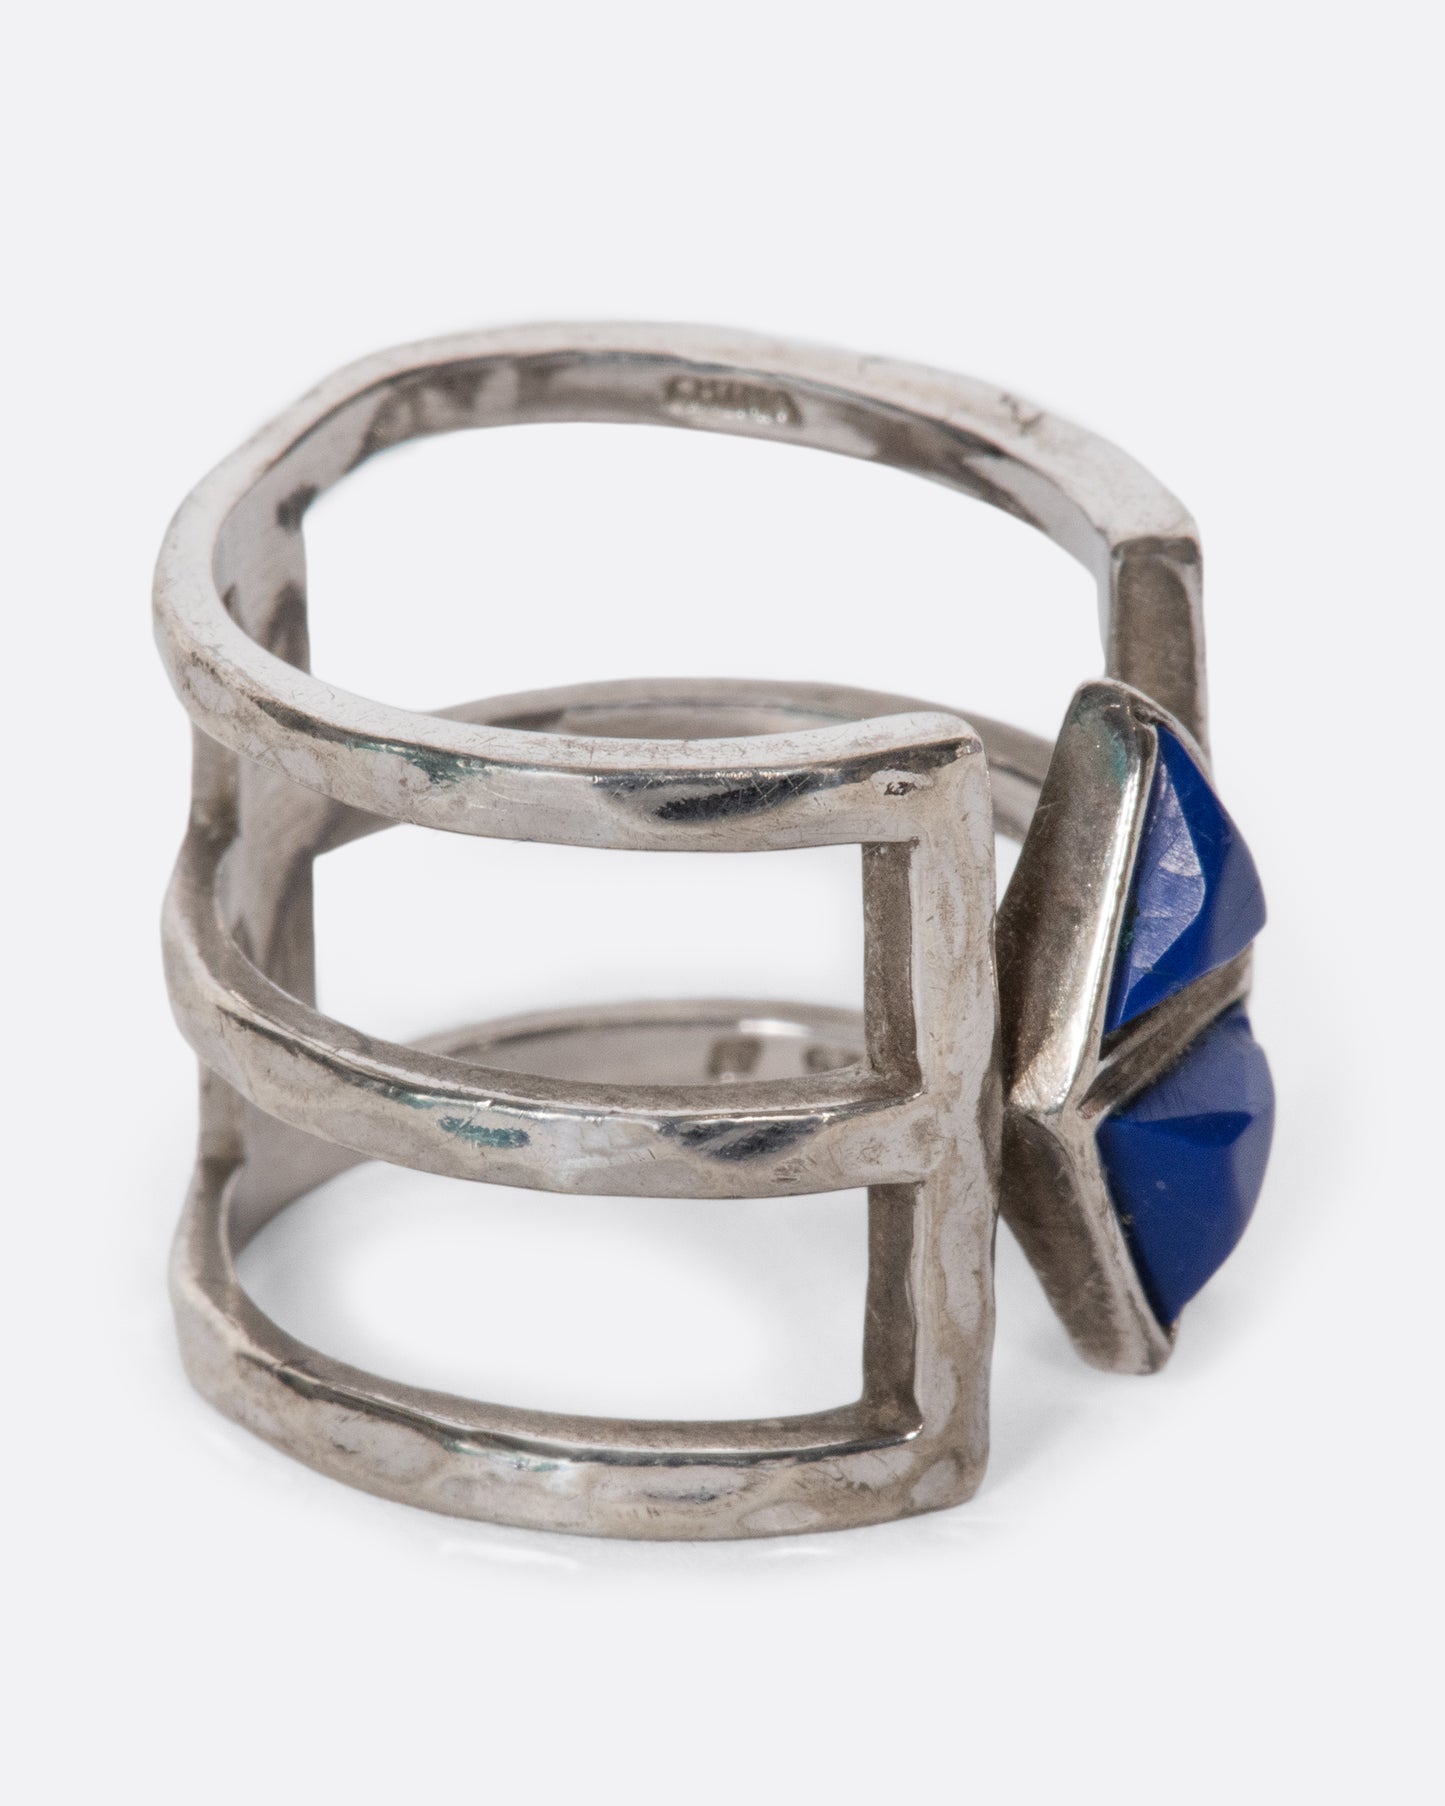 This triple-banded sterling silver vintage ring is centered around a pair of dreamy lapis triangles. Negative space between the bands gives the illusion that the lapis is effortlessly floating. This piece takes up a lot of space on your finger, creating an elongating effect.